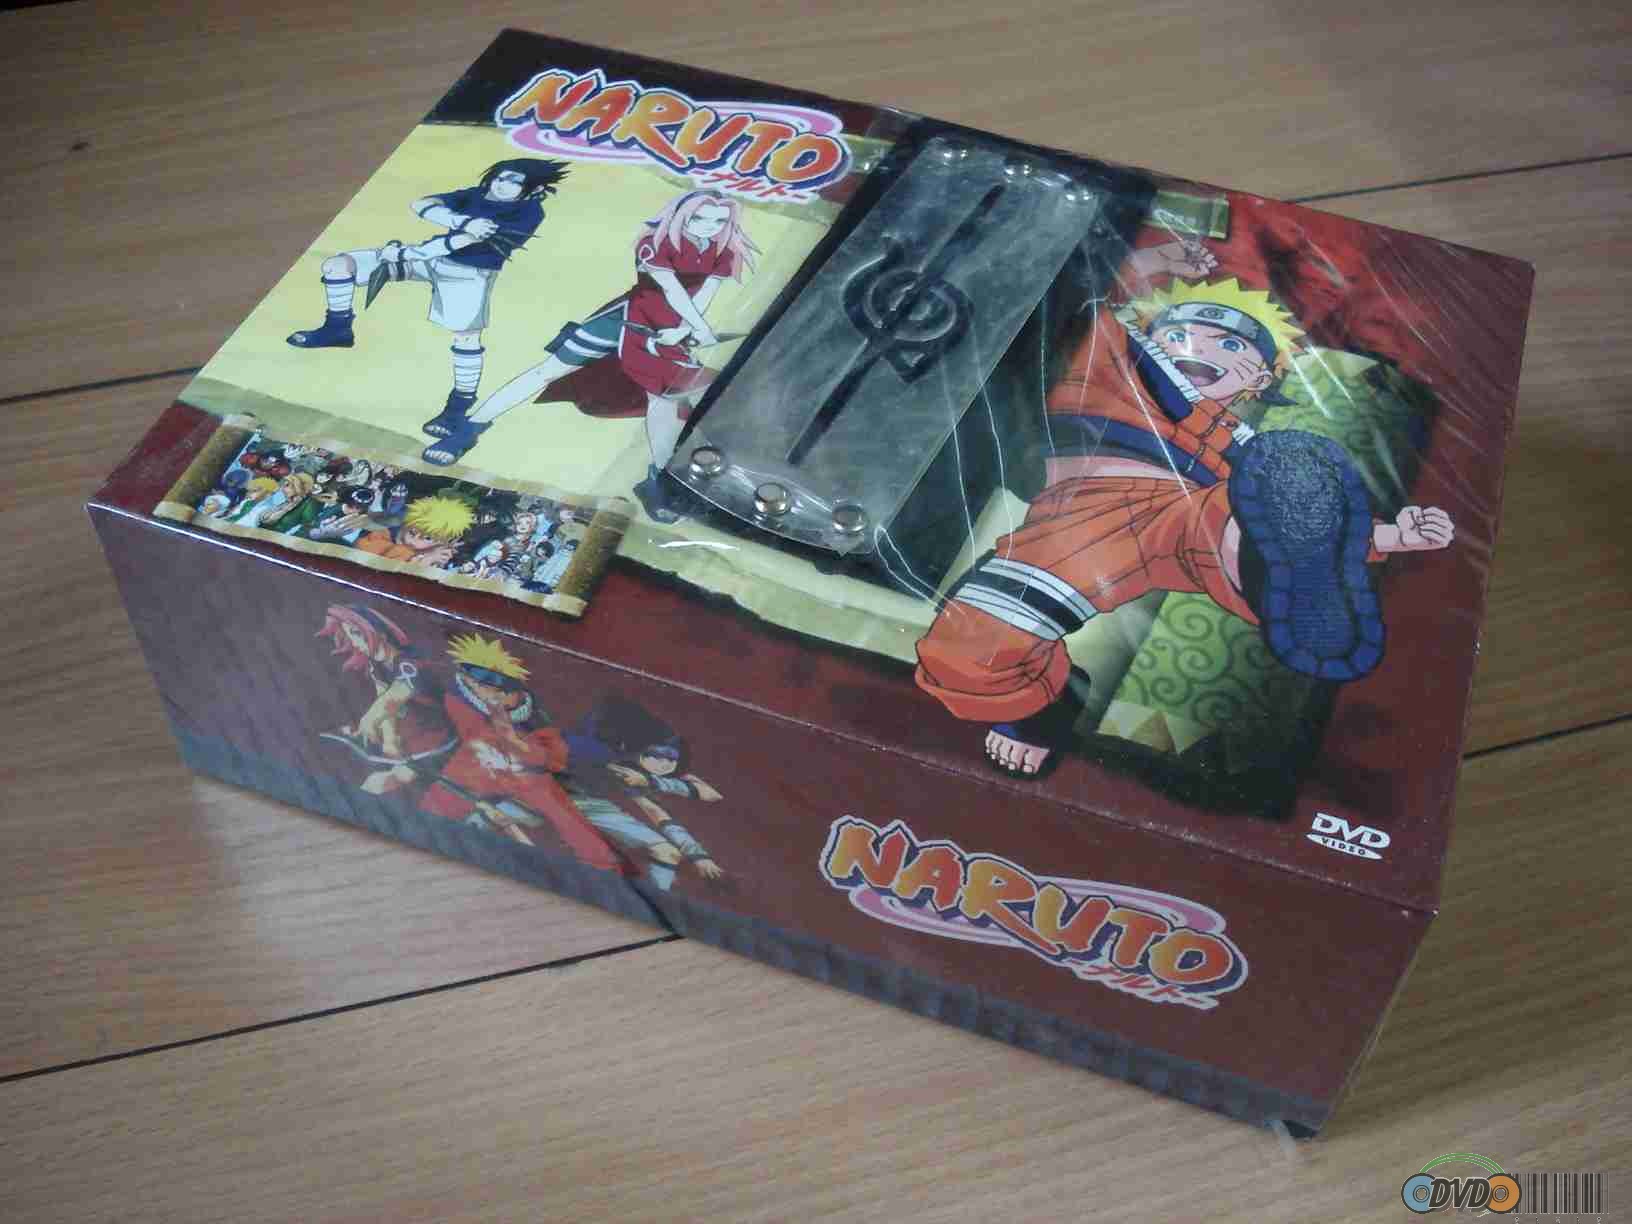 Naruto COMPLETE 179 episodes + MOVIES 38 DVDs BOX SET